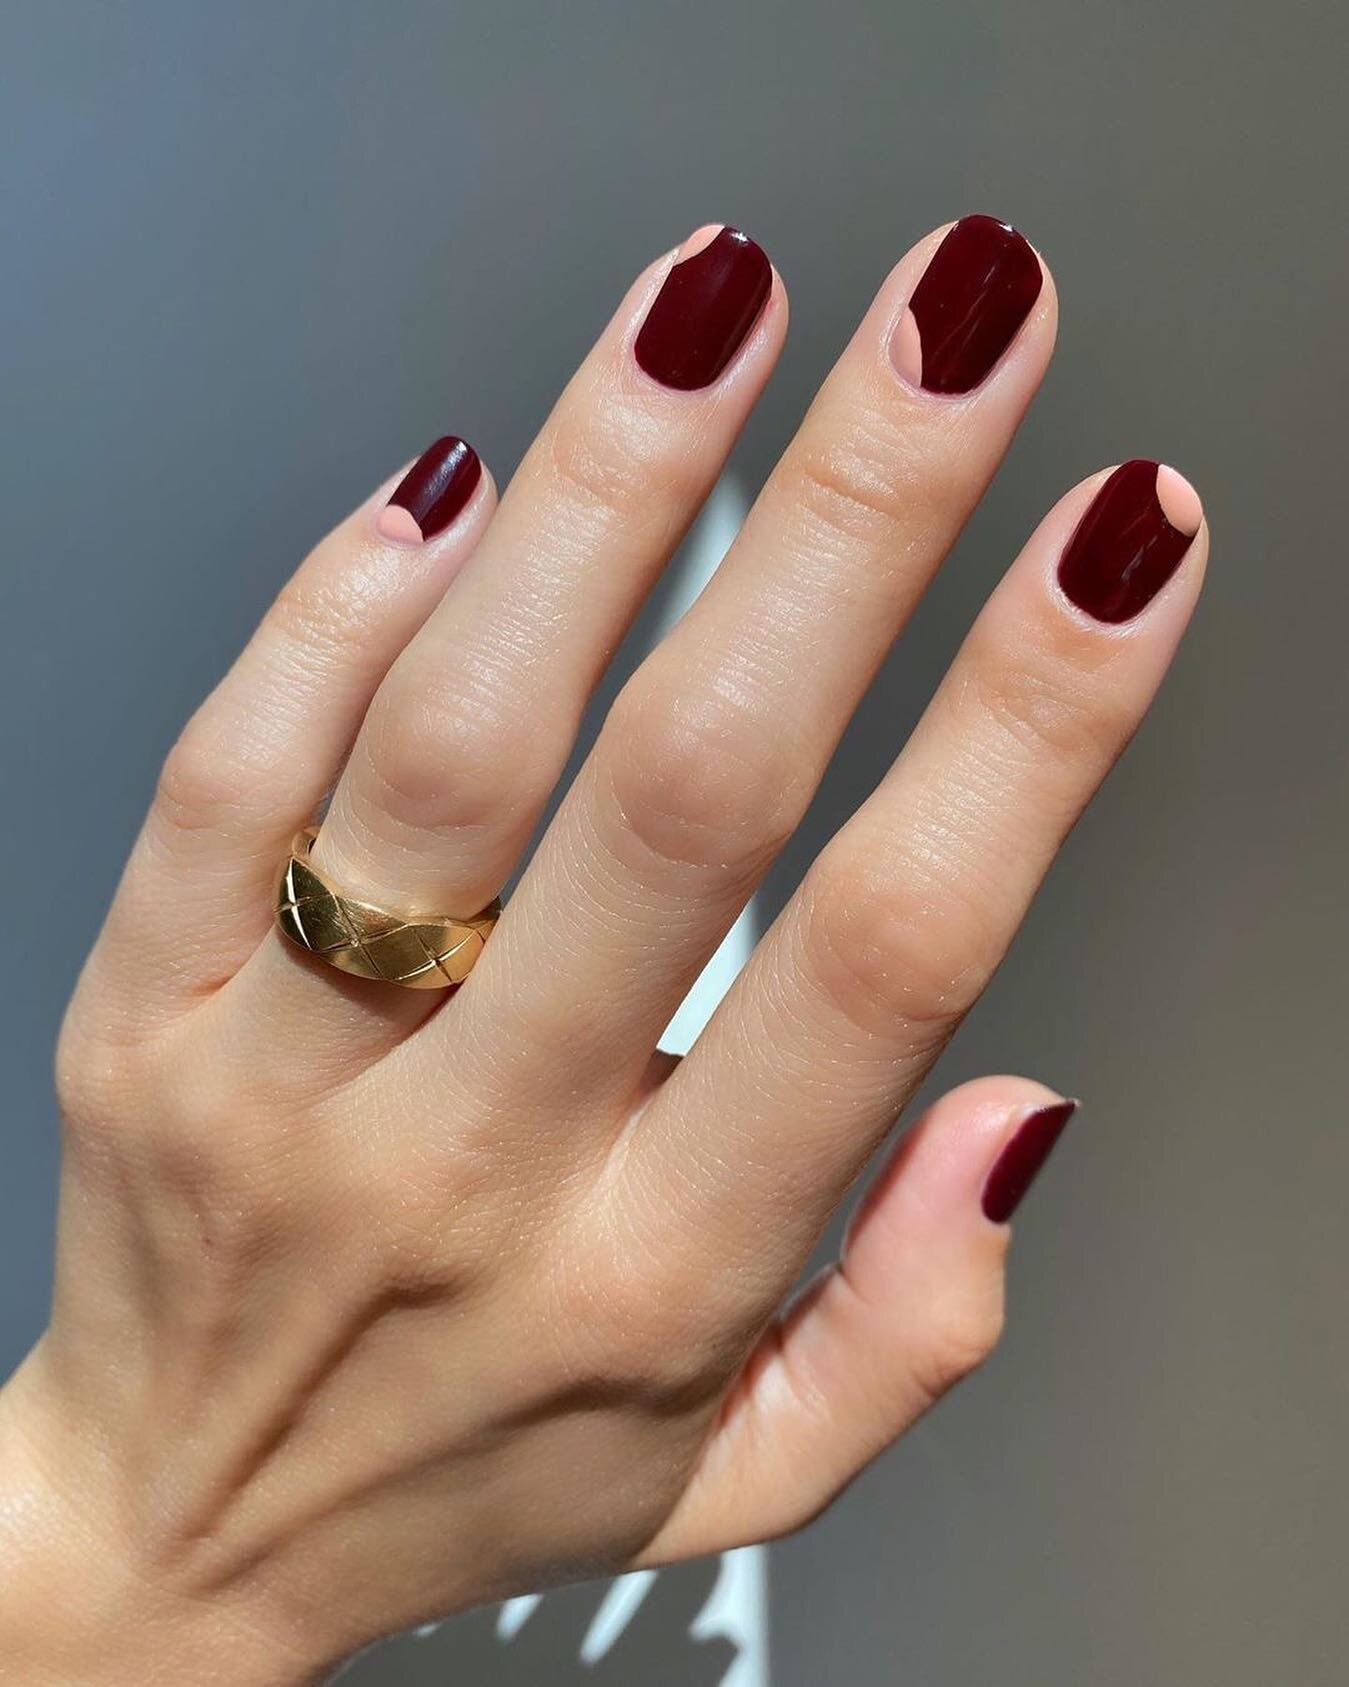 Get Polished to Perfection with These 4 Nail Artists